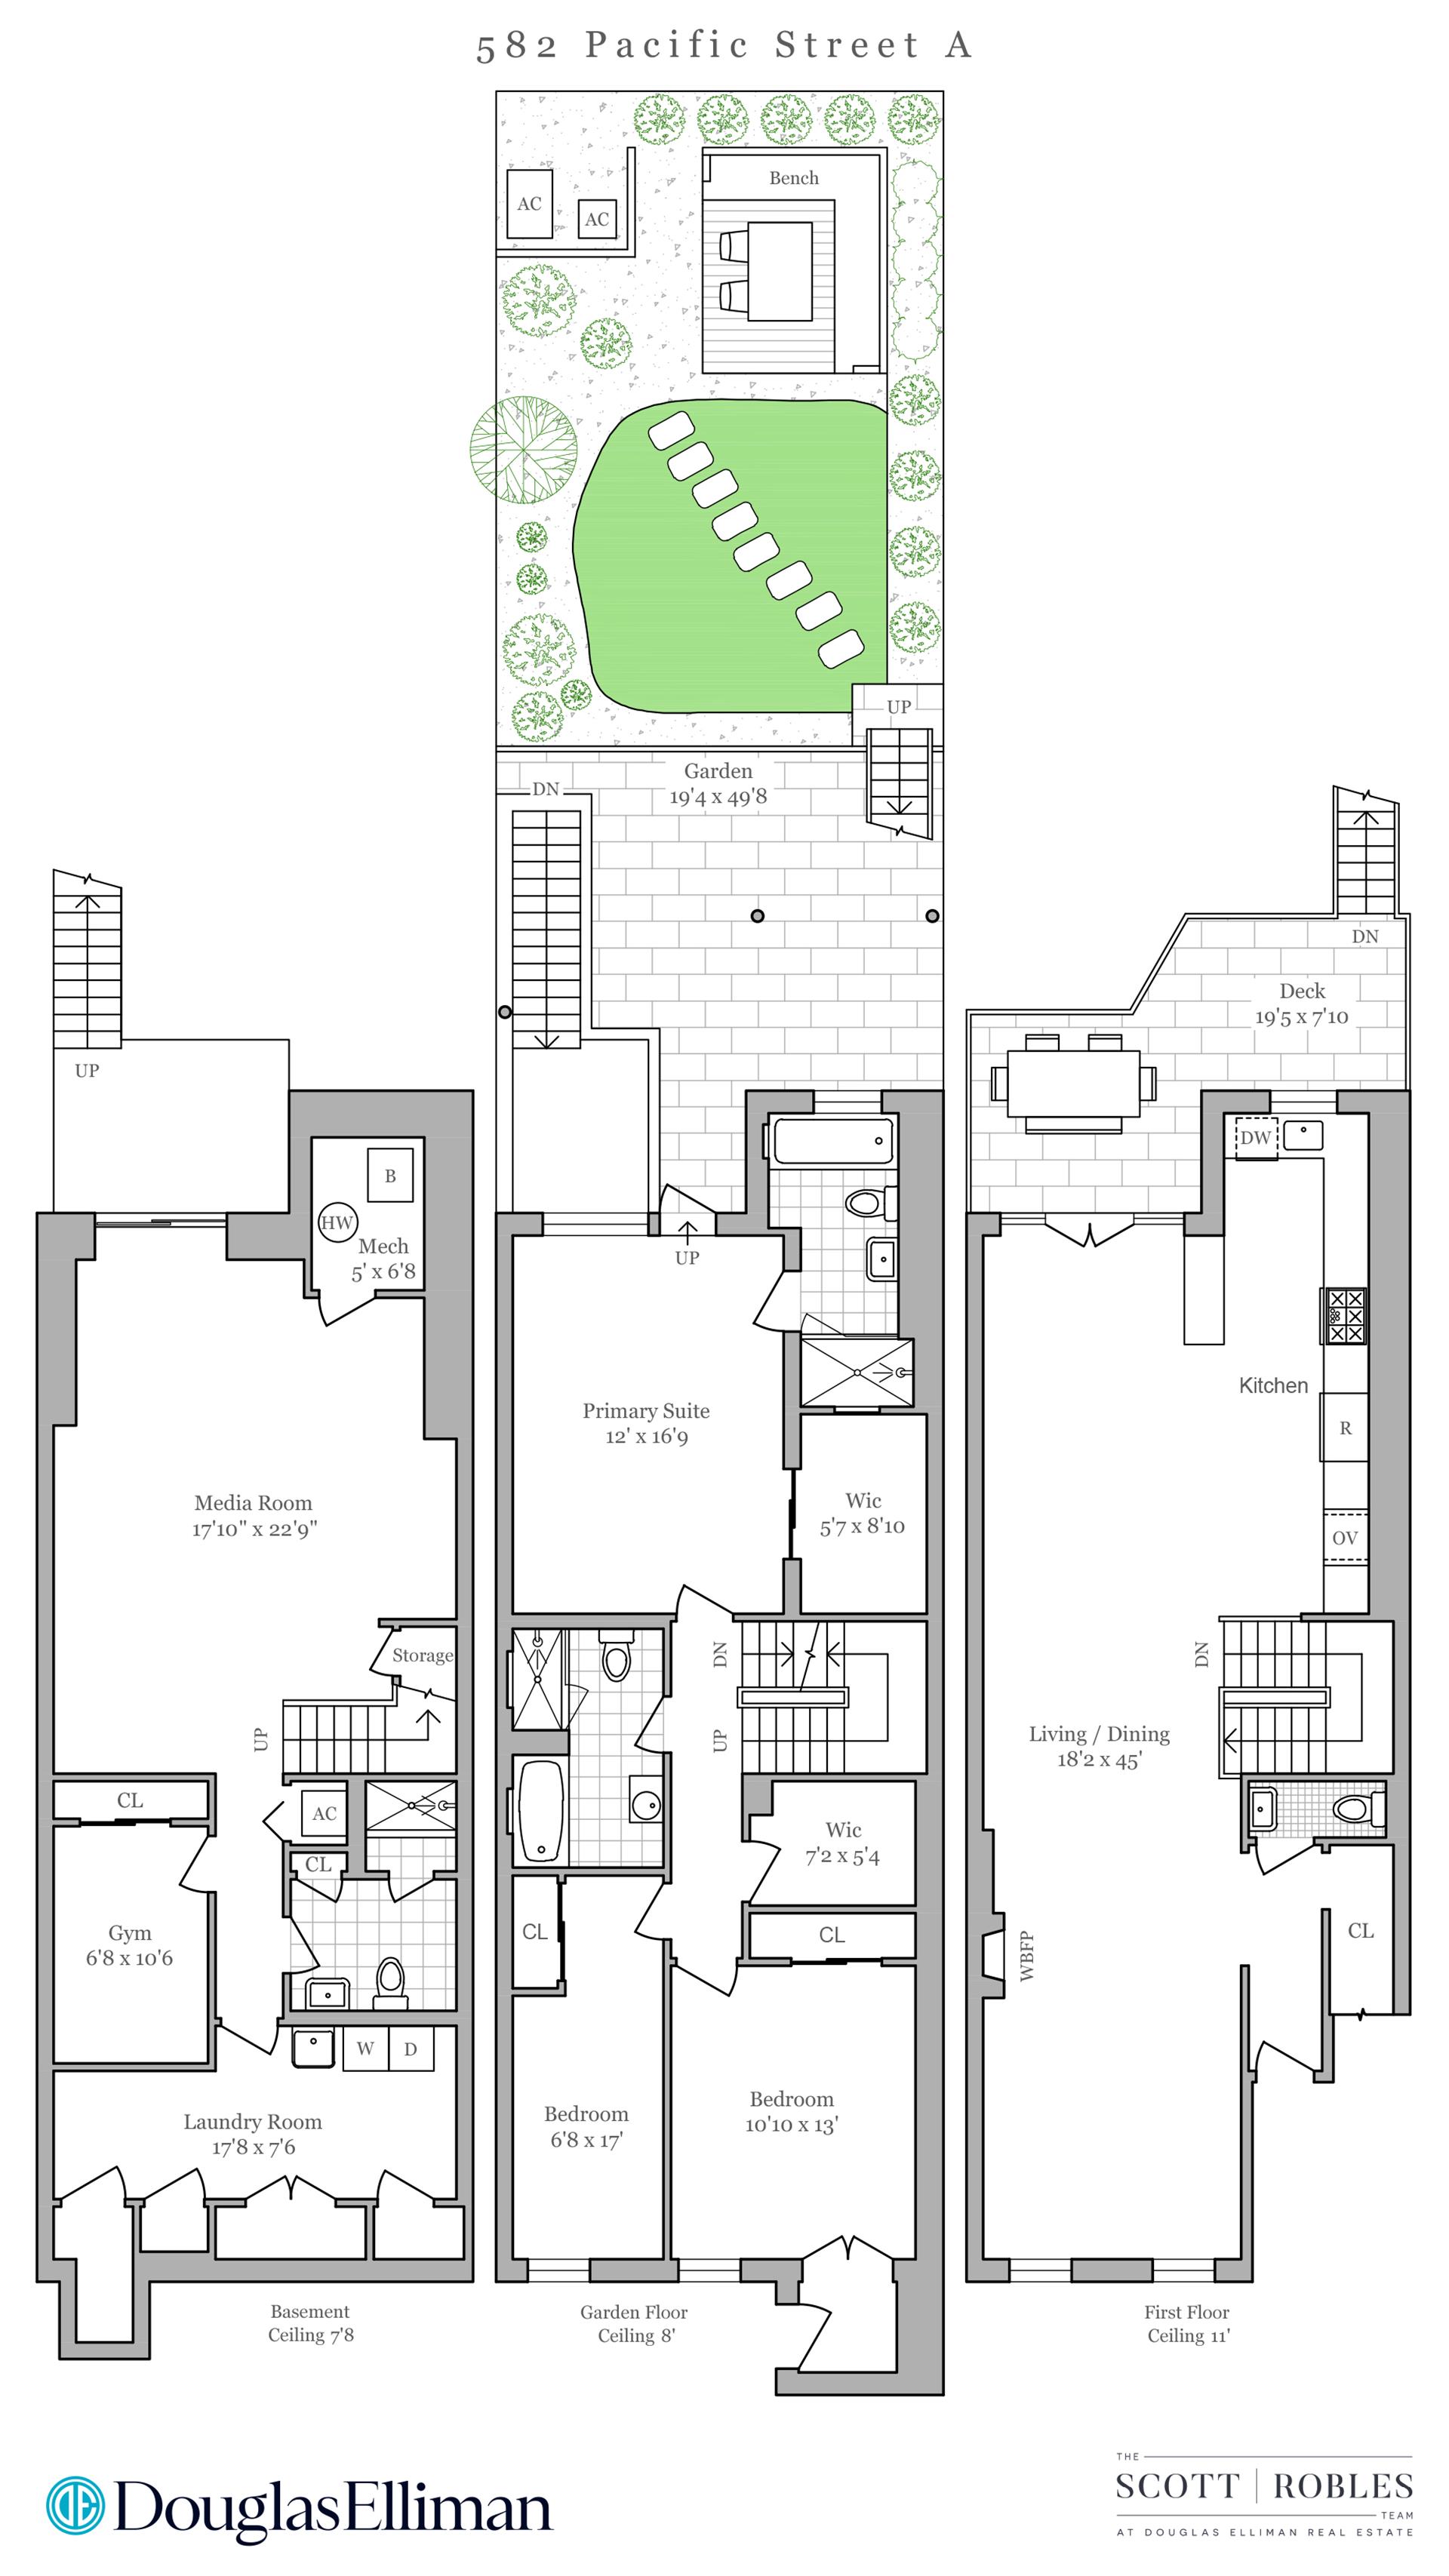 Floorplan for 582 Pacific Street, A